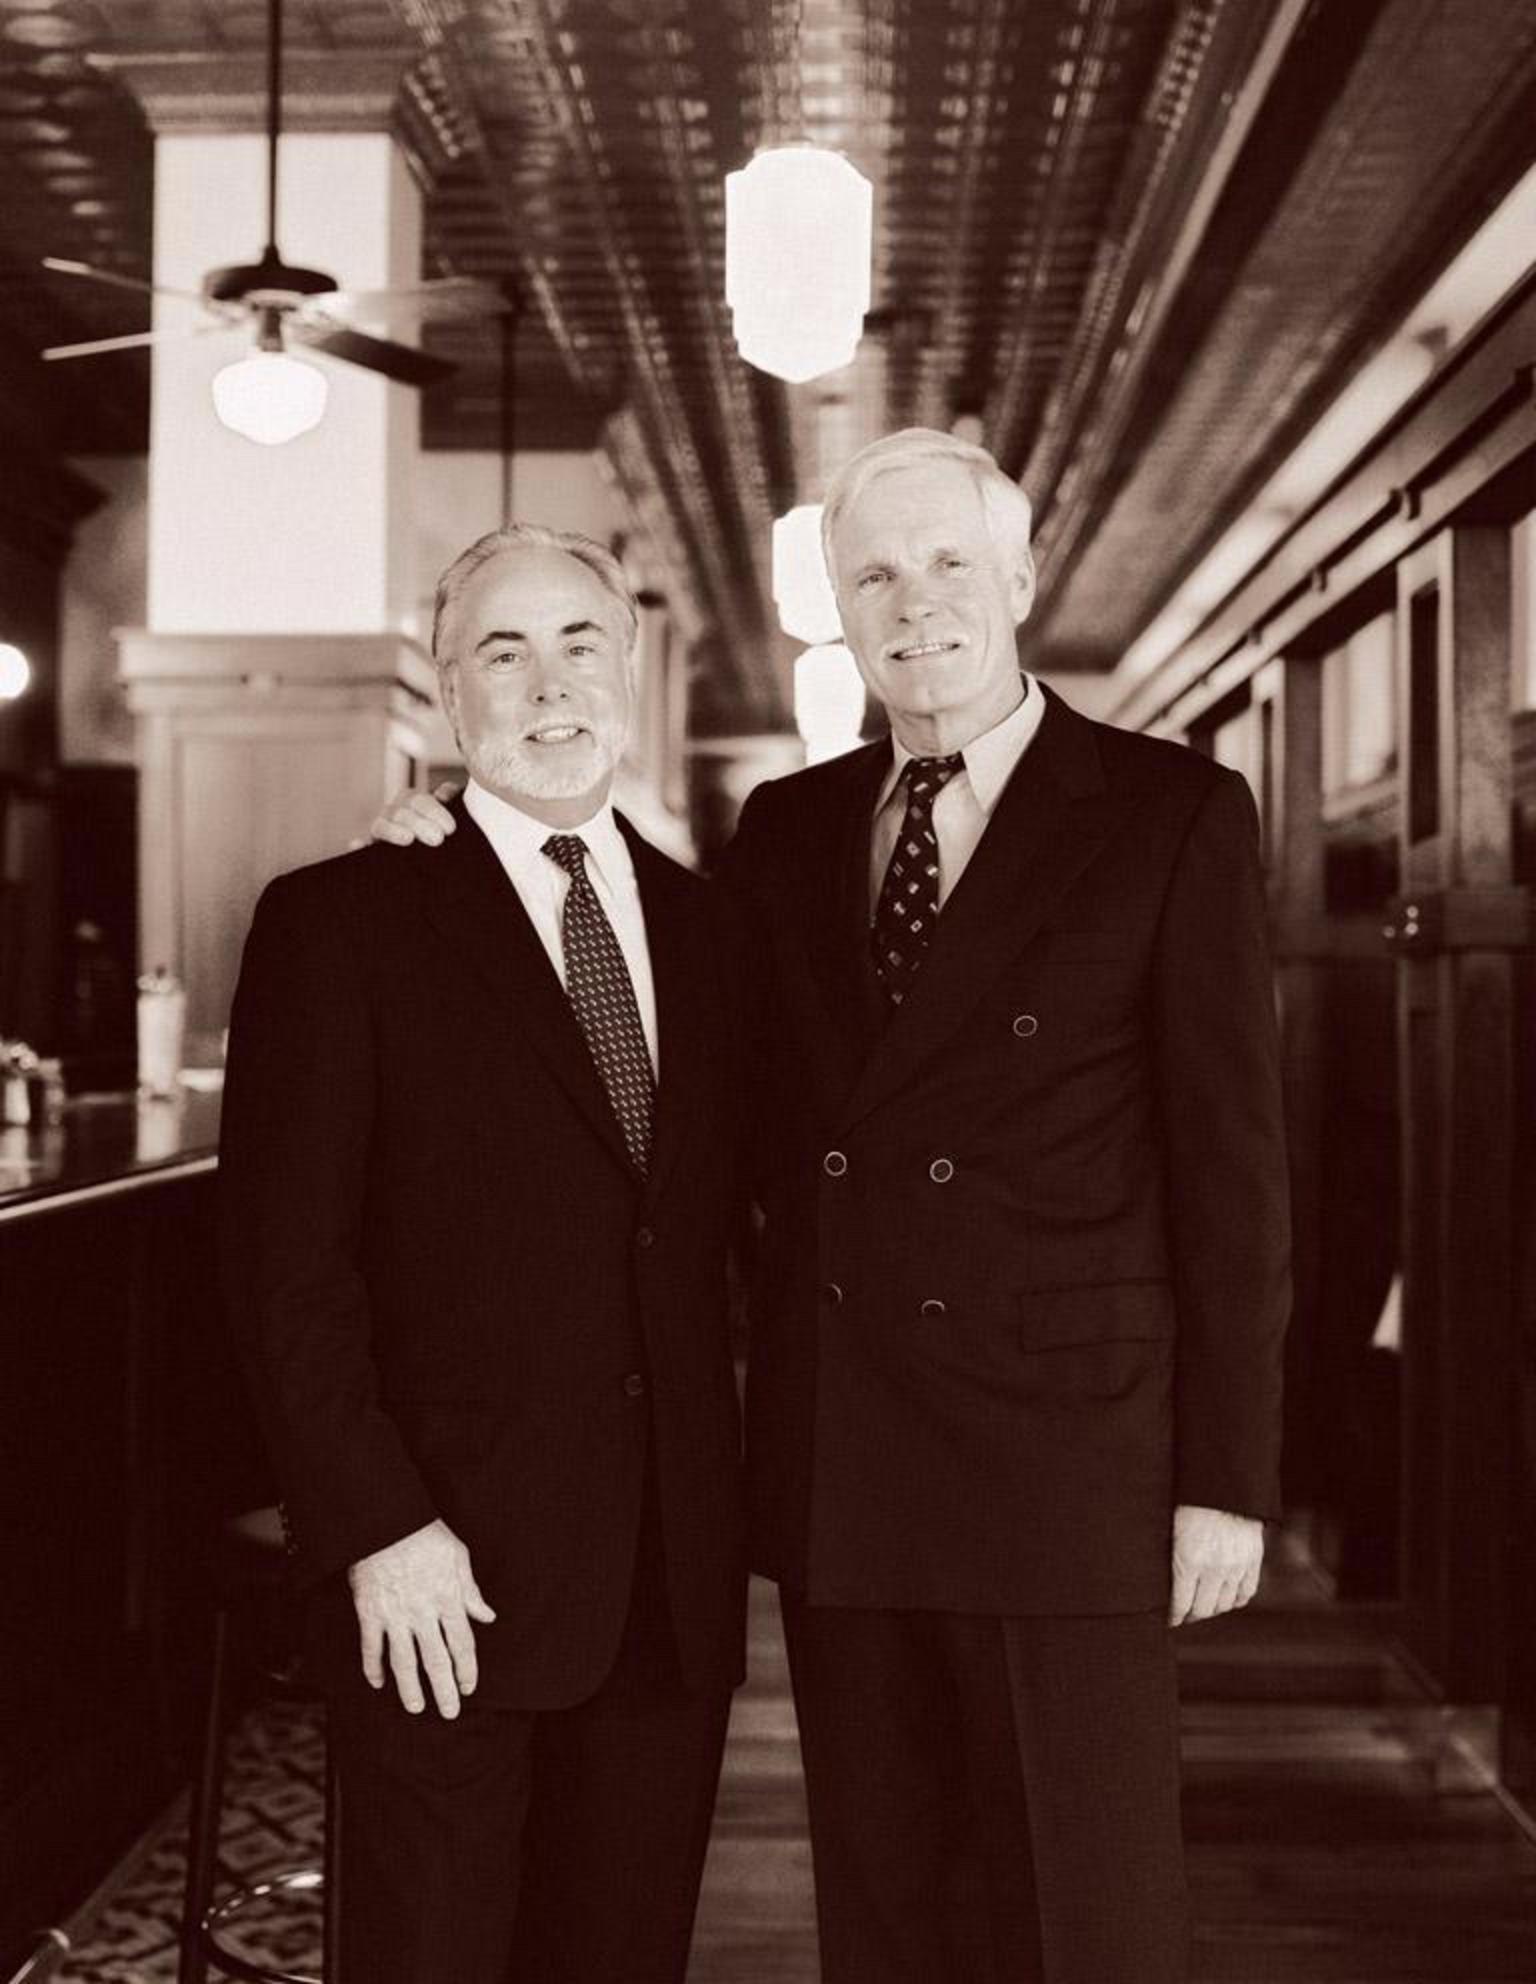 George McKerrow, left, with Ted Turner, at the Ted's Montana Grill restaurant located at the Turner Building in downtown Atlanta. Photo courtesy Ted's Montana Grill